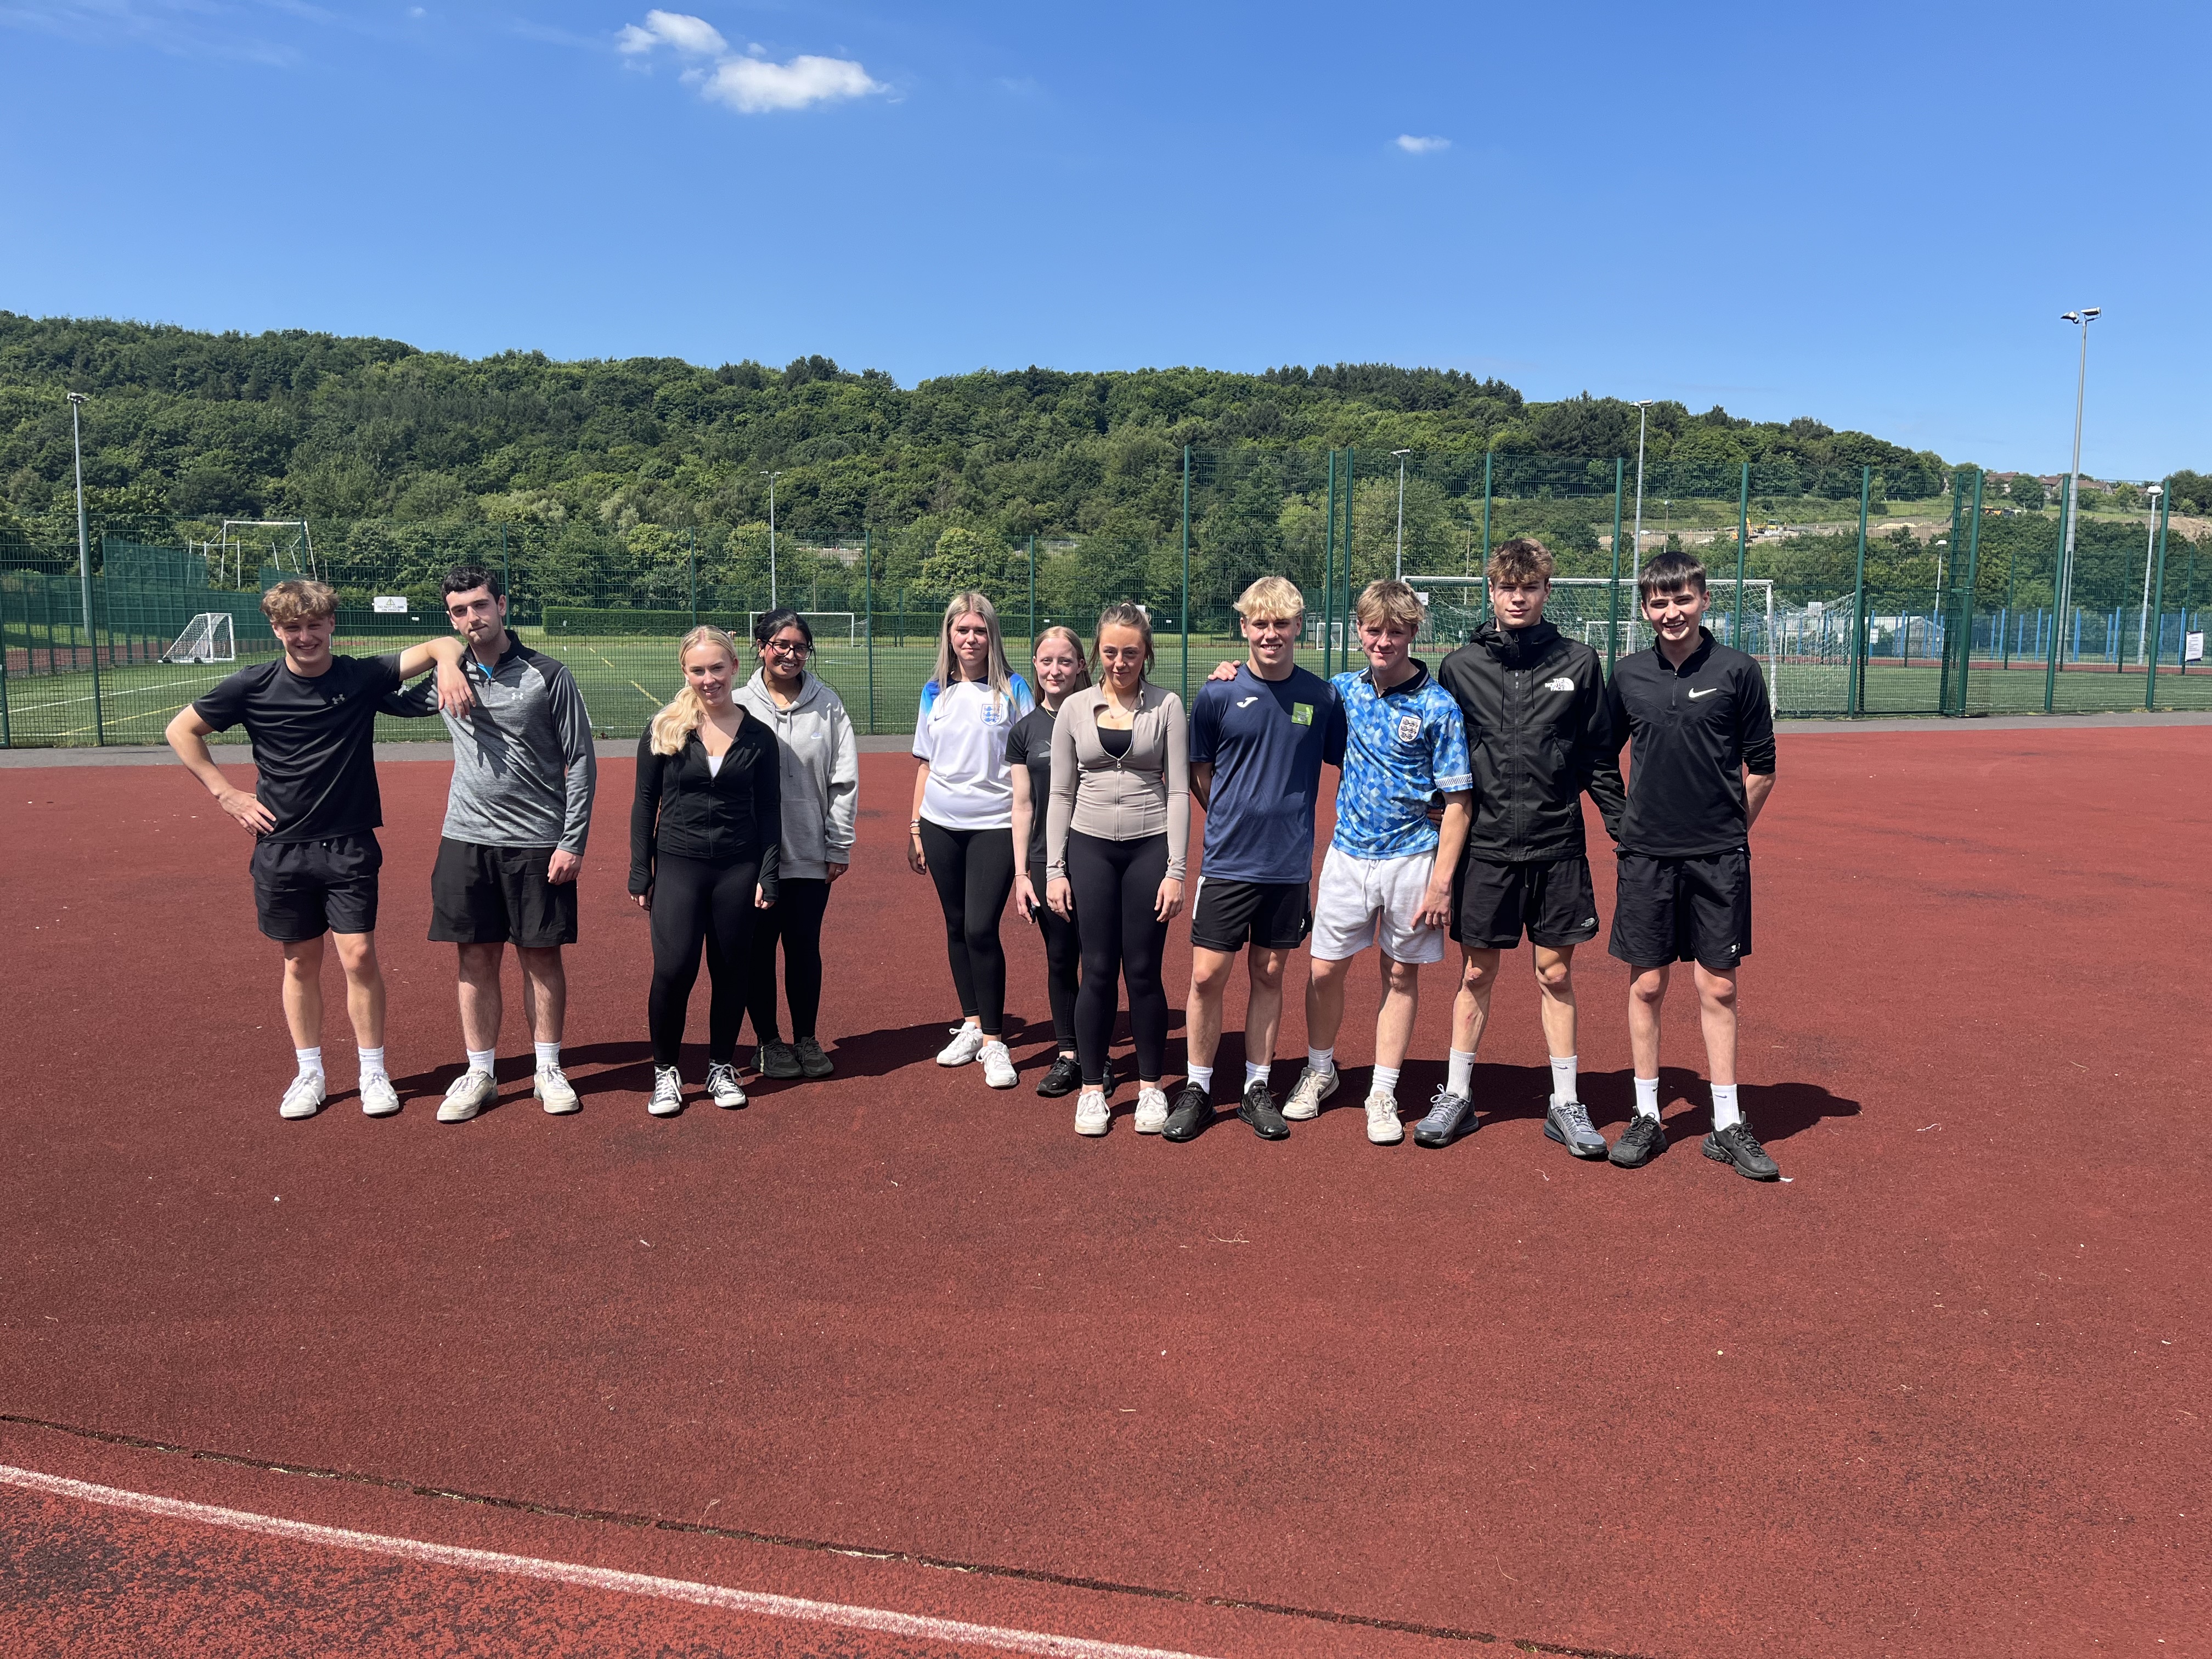 MULTI TALENTED SPORTS STUDENTS DELIVER MULTI SKILLS ACTIVITIES FOR LOCAL SCHOOL CHILDREN